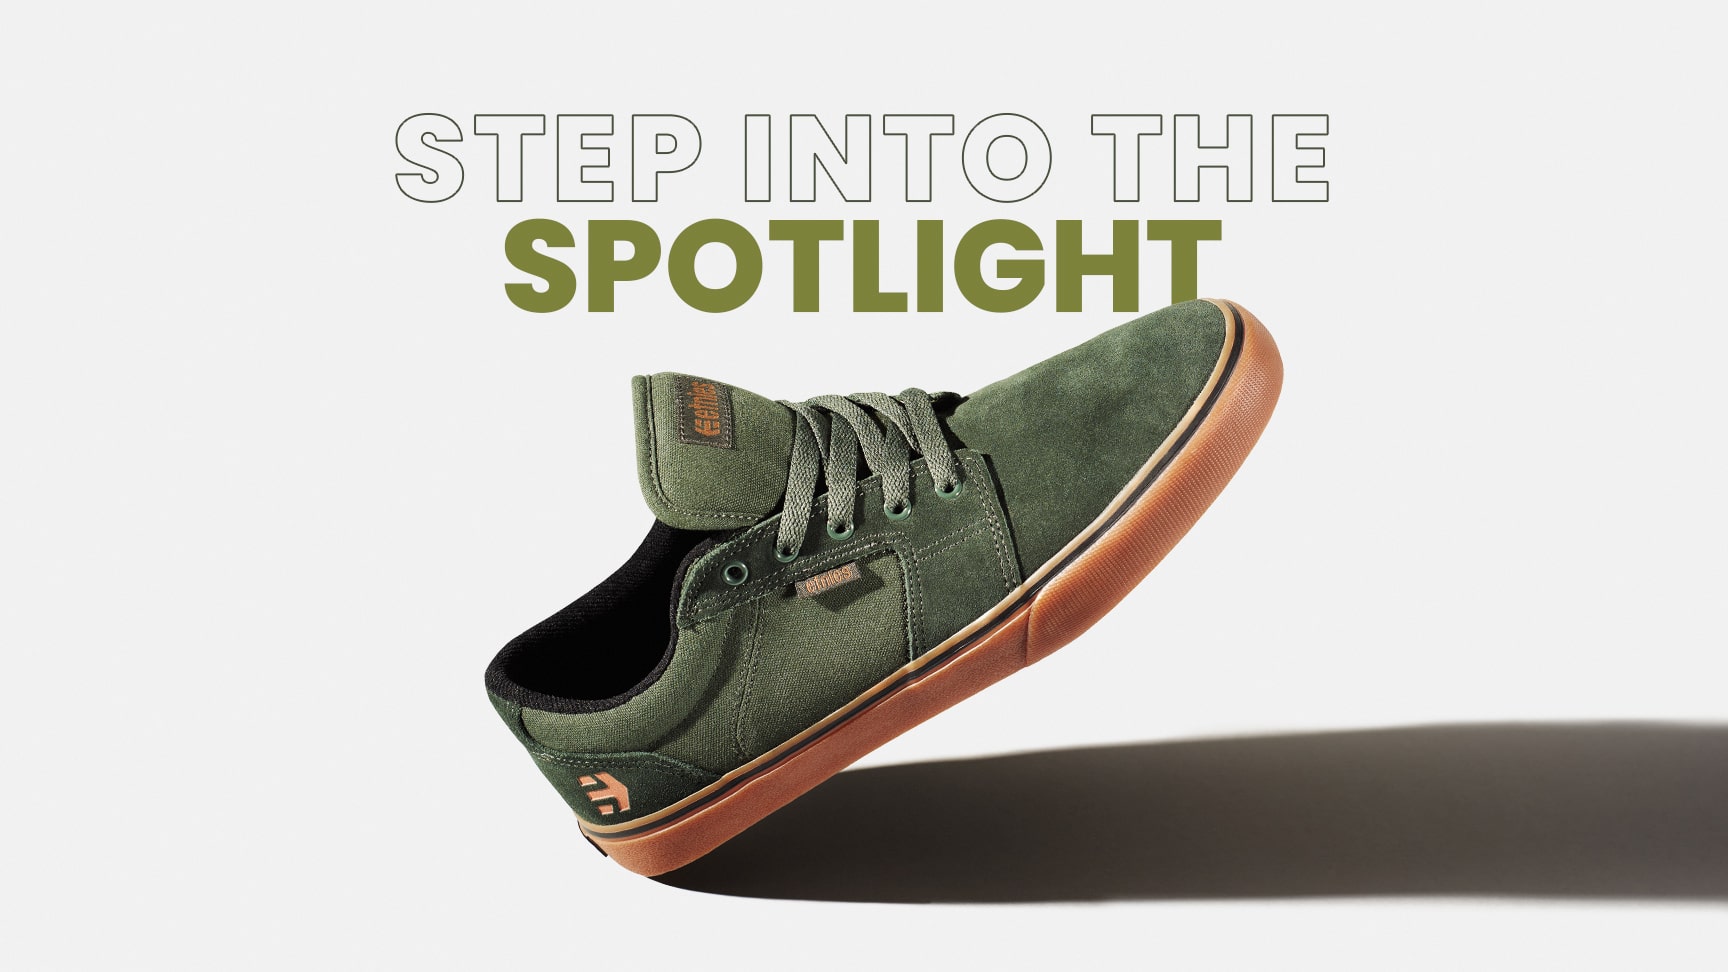 Banner combining design and photography, with the message "Step into the spotlight" and a creative product photography of a green Etnies sneakers shoe, in a step-like position and a long shadow under it.